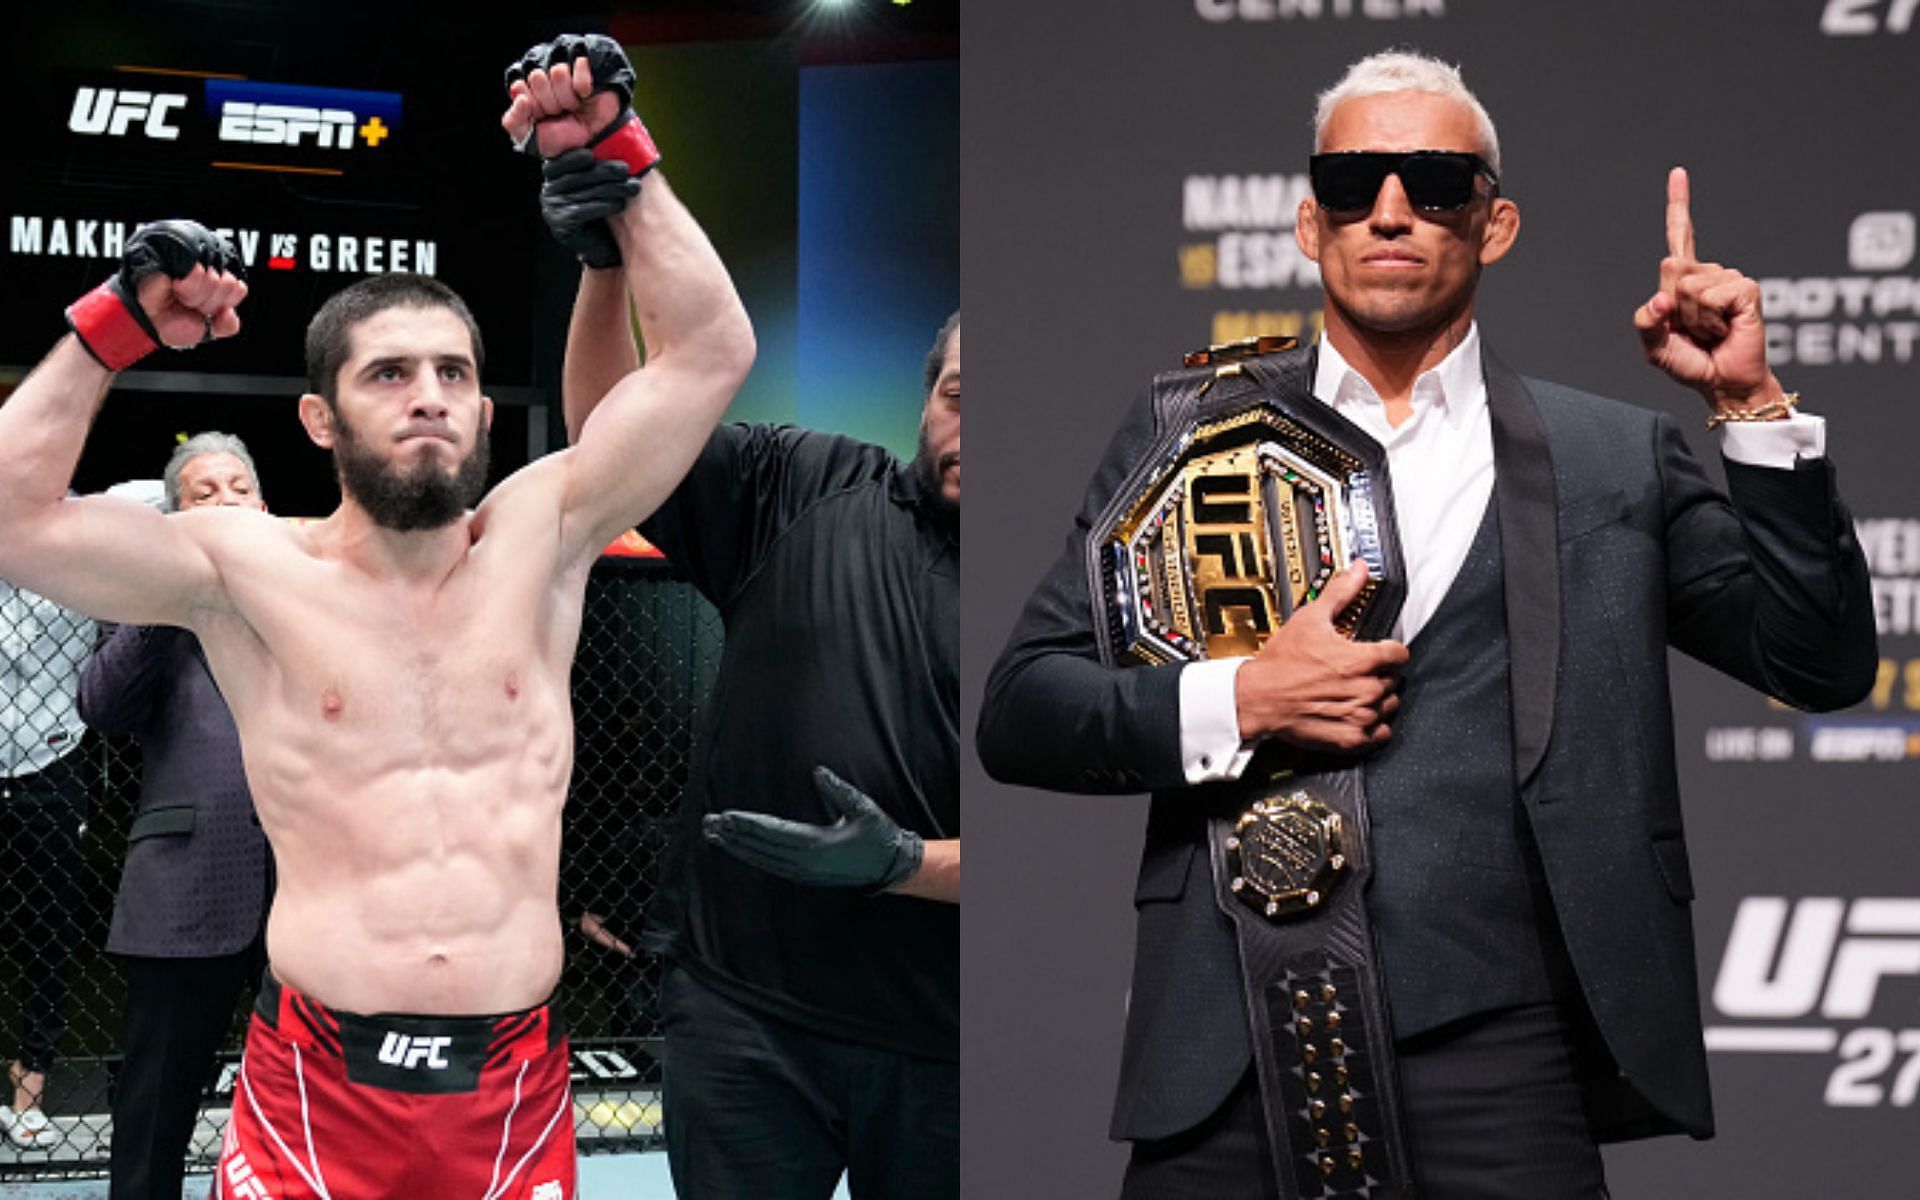 Islam Makhachev (left) and Charles Oliveira (right) (Images via Getty)